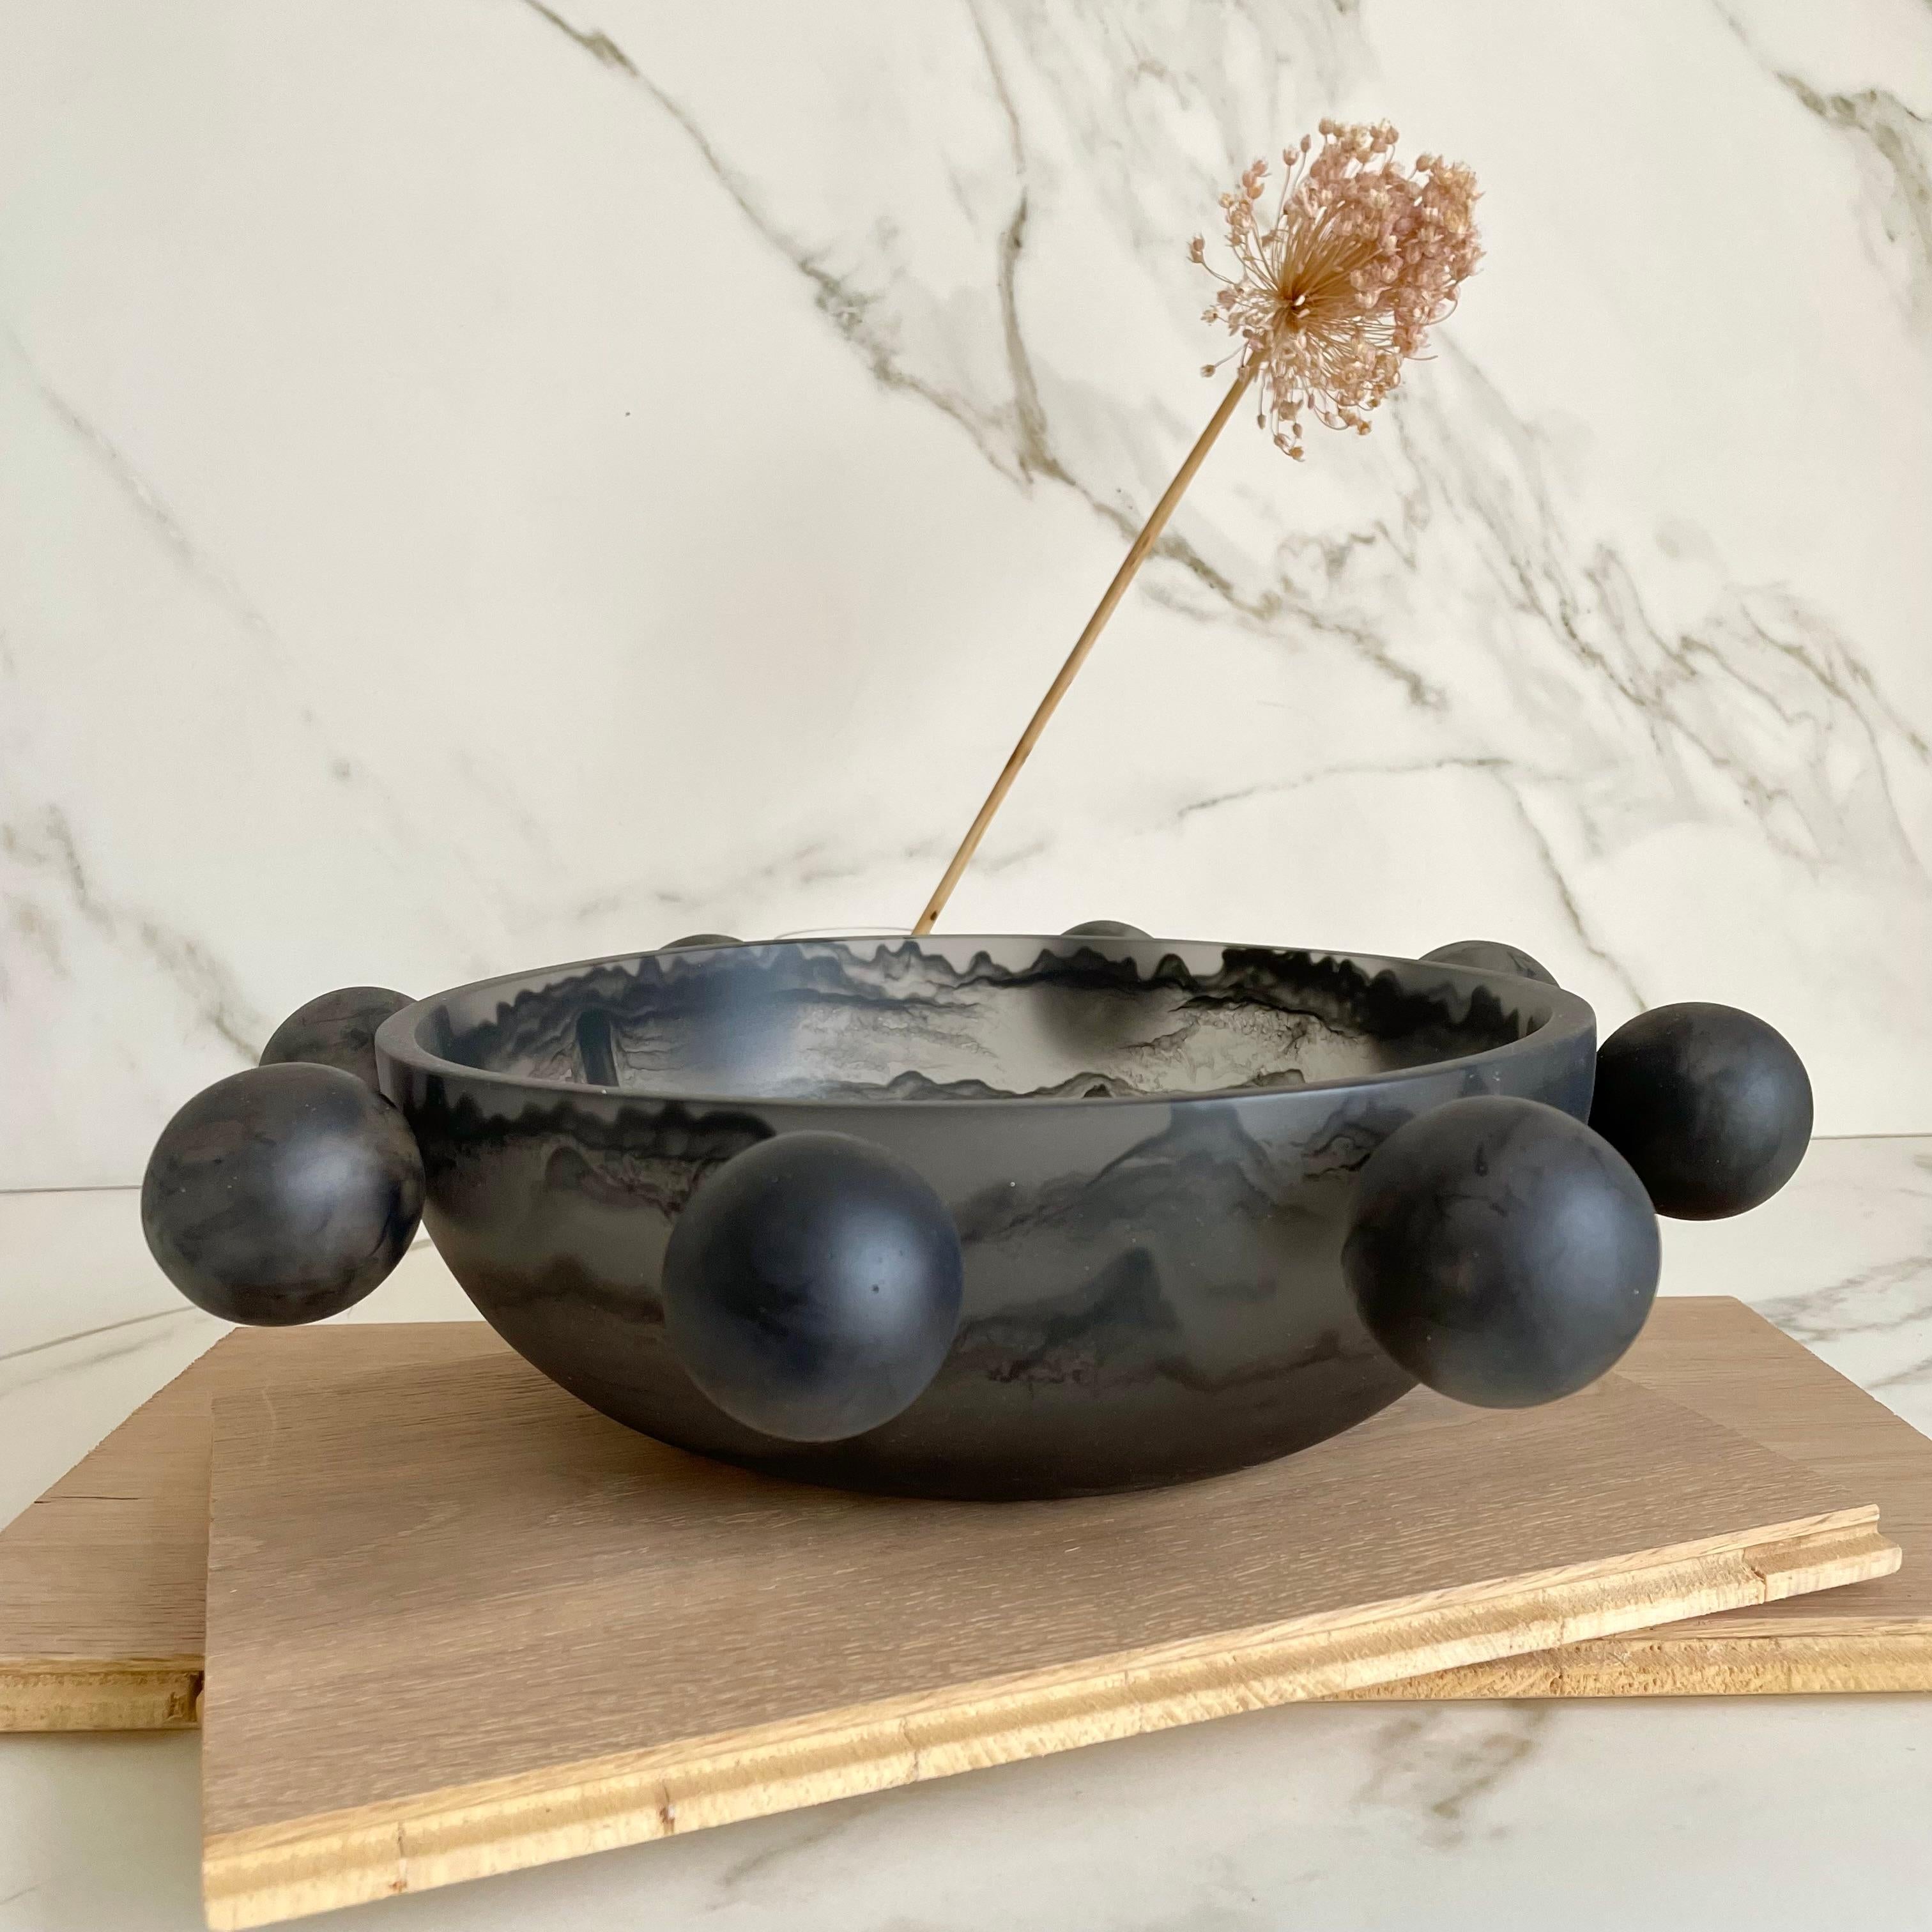 Our Bubble Bowl is handmade in smoke & black marbled resin. Its modern, fun and unique design makes it a statement piece and can be used as decor or as a fruit platter.

Designed by Paola Valle and manufactured in Mexico City by extraordinary